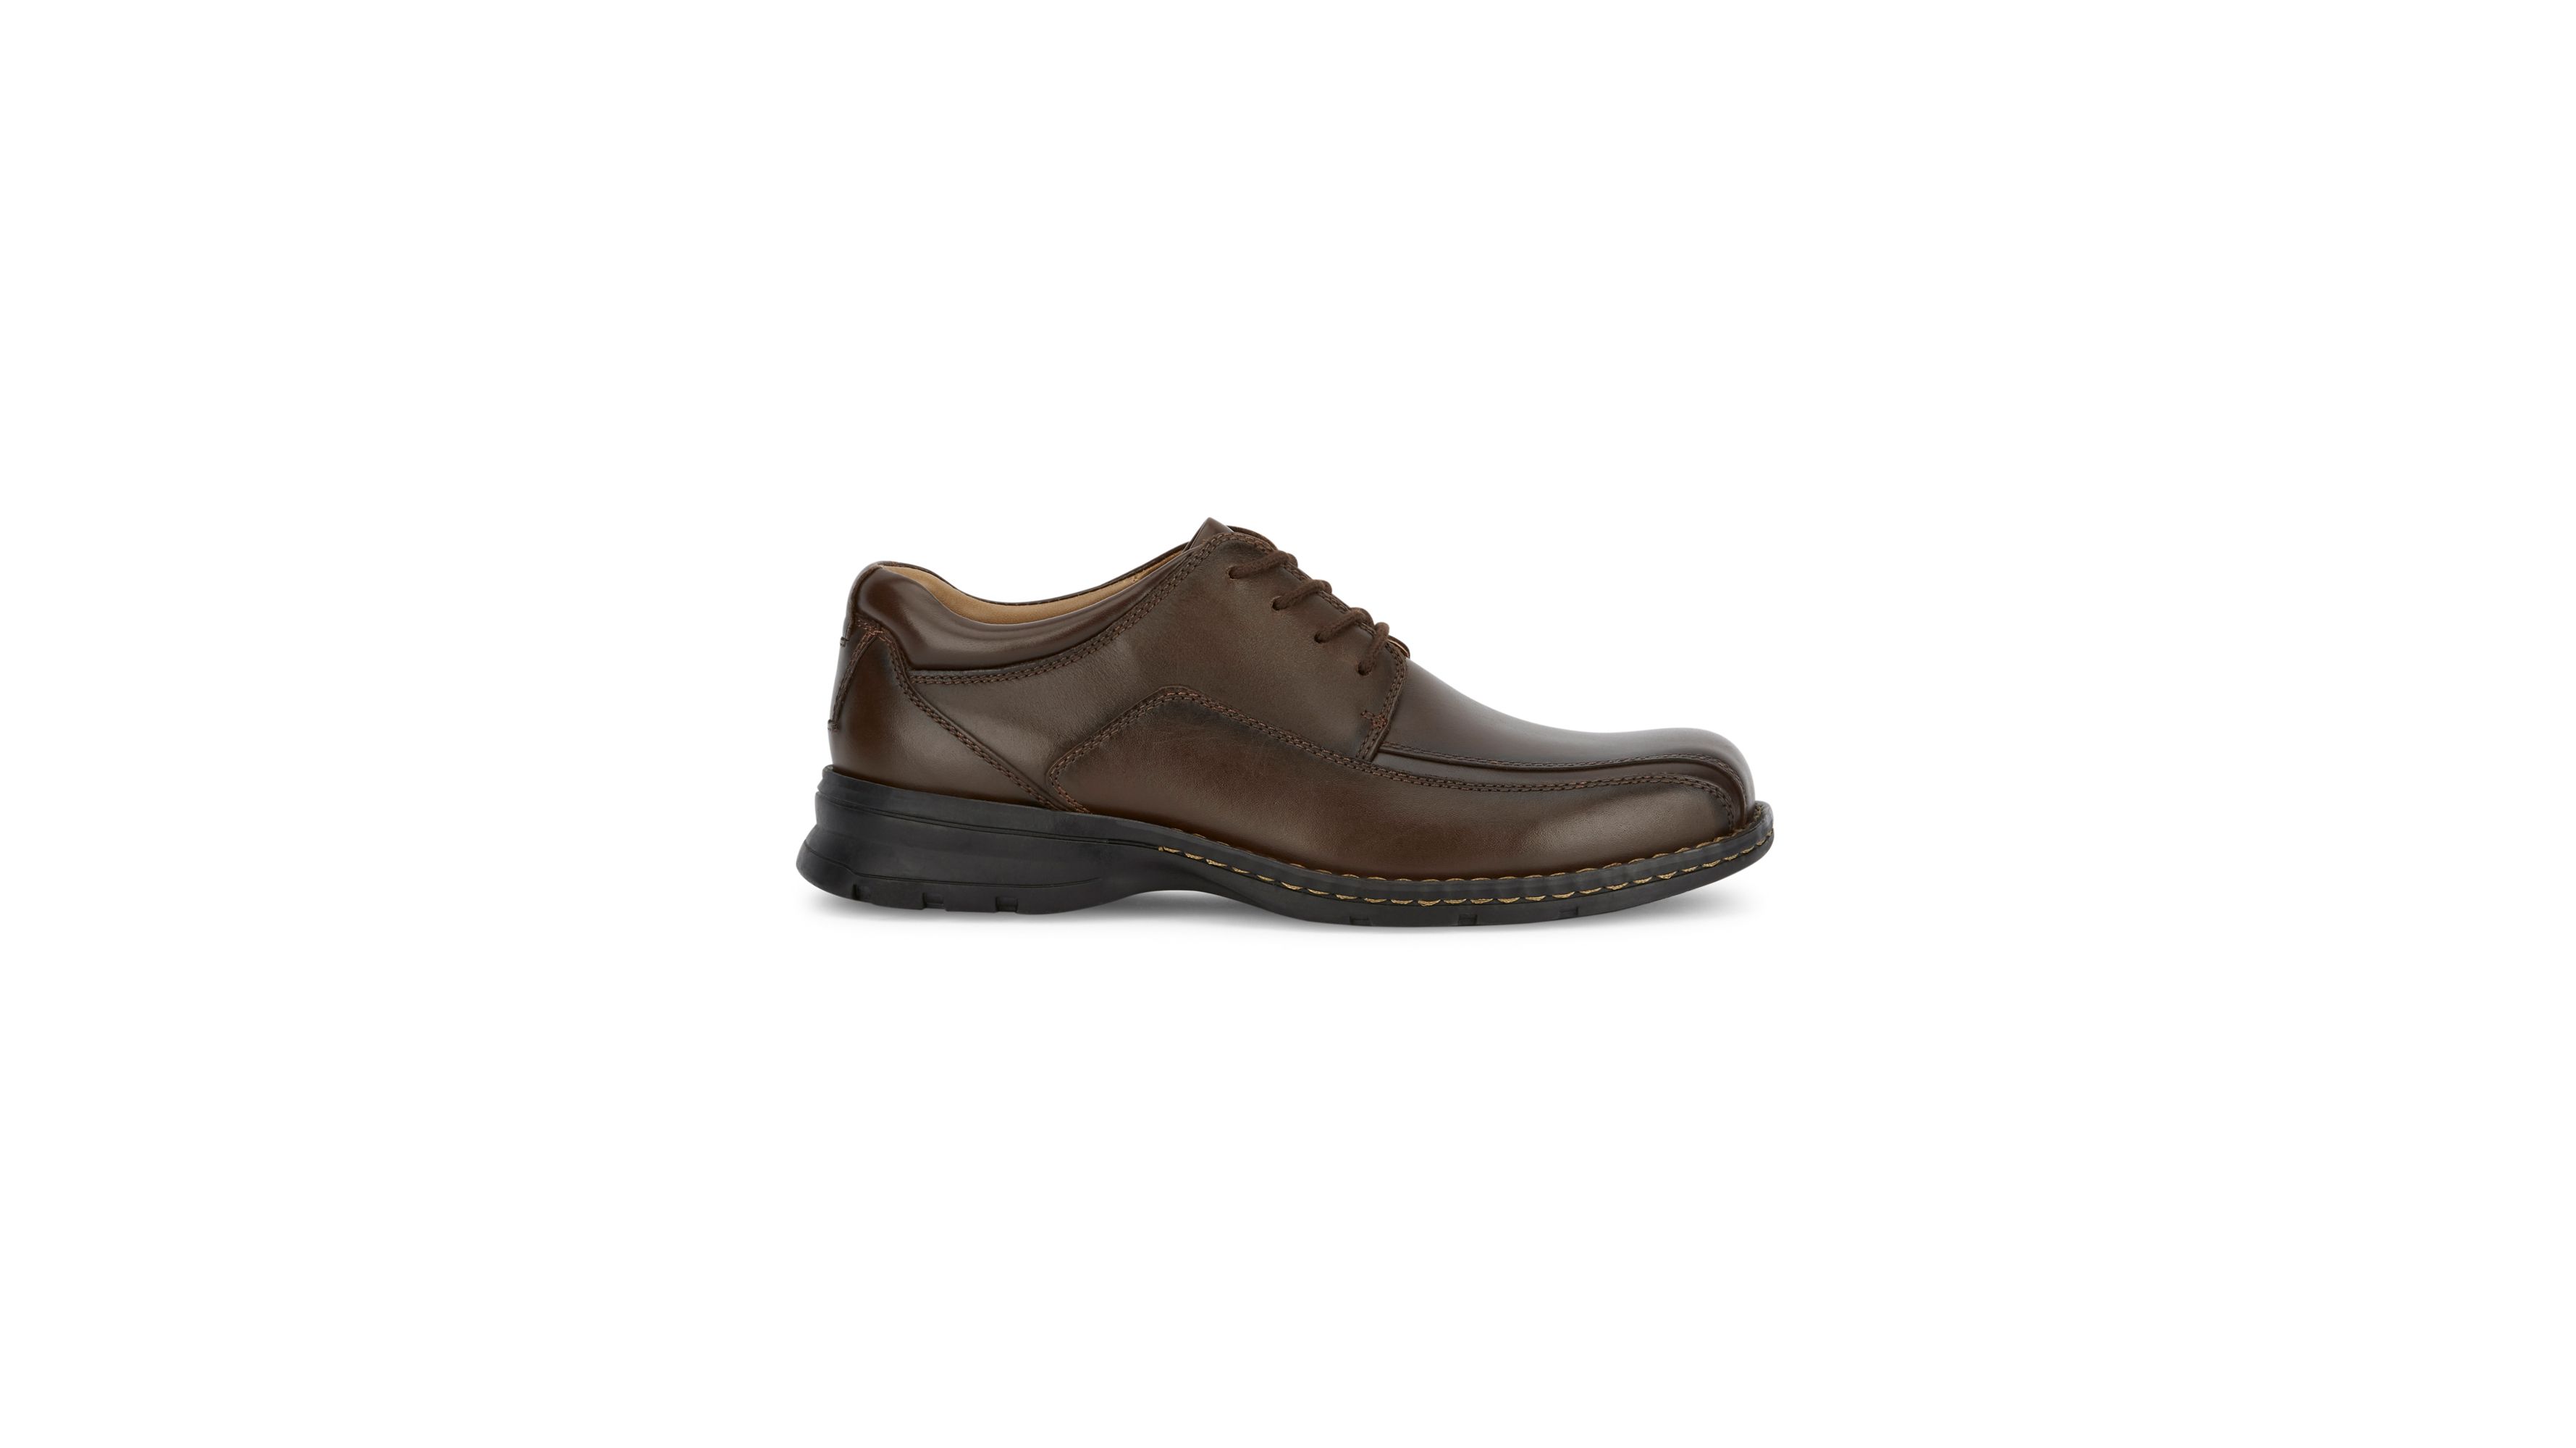 Trustee Oxford Shoes - Brown 290230001 